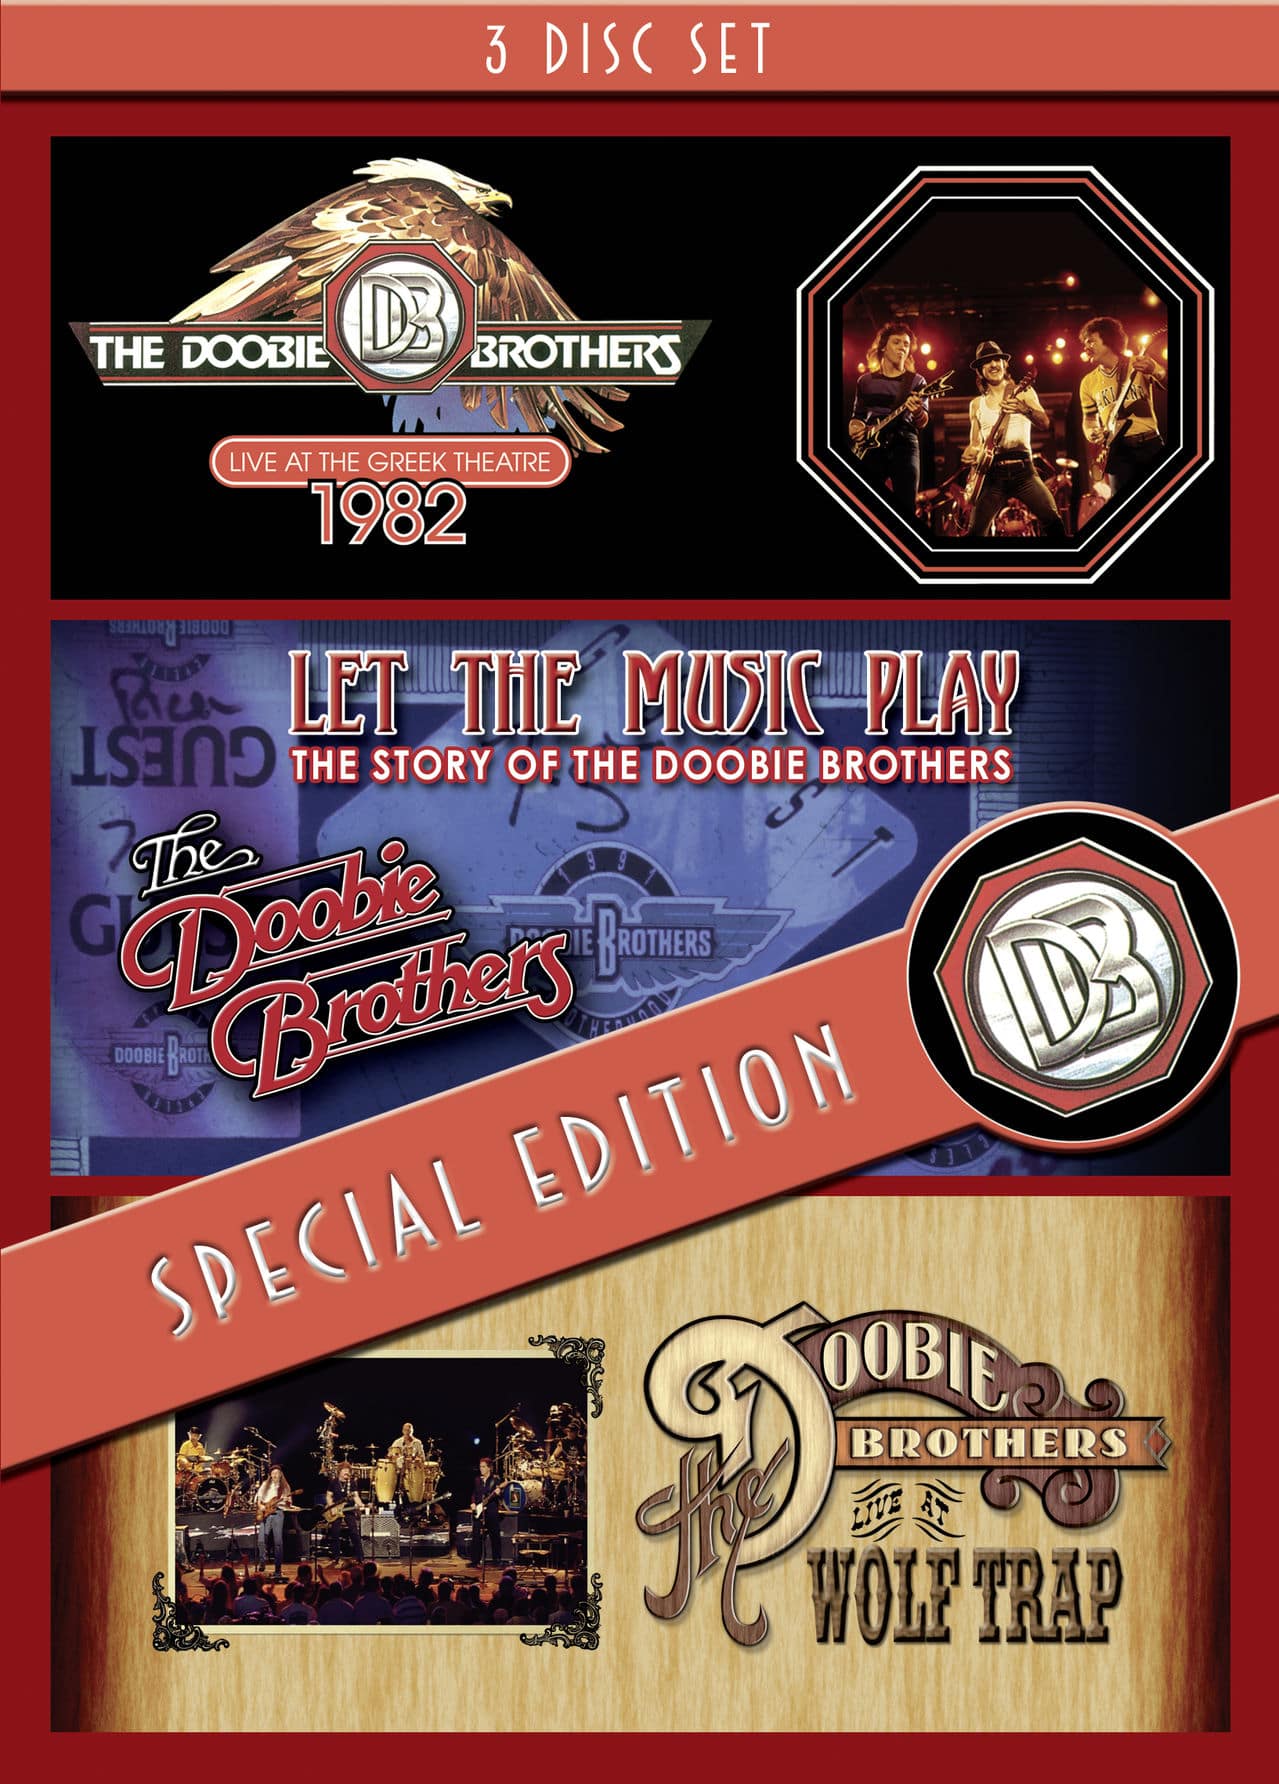 Doobie Brothers - LIVE AT THE GREEK THEATRE 1982 - 3DVD